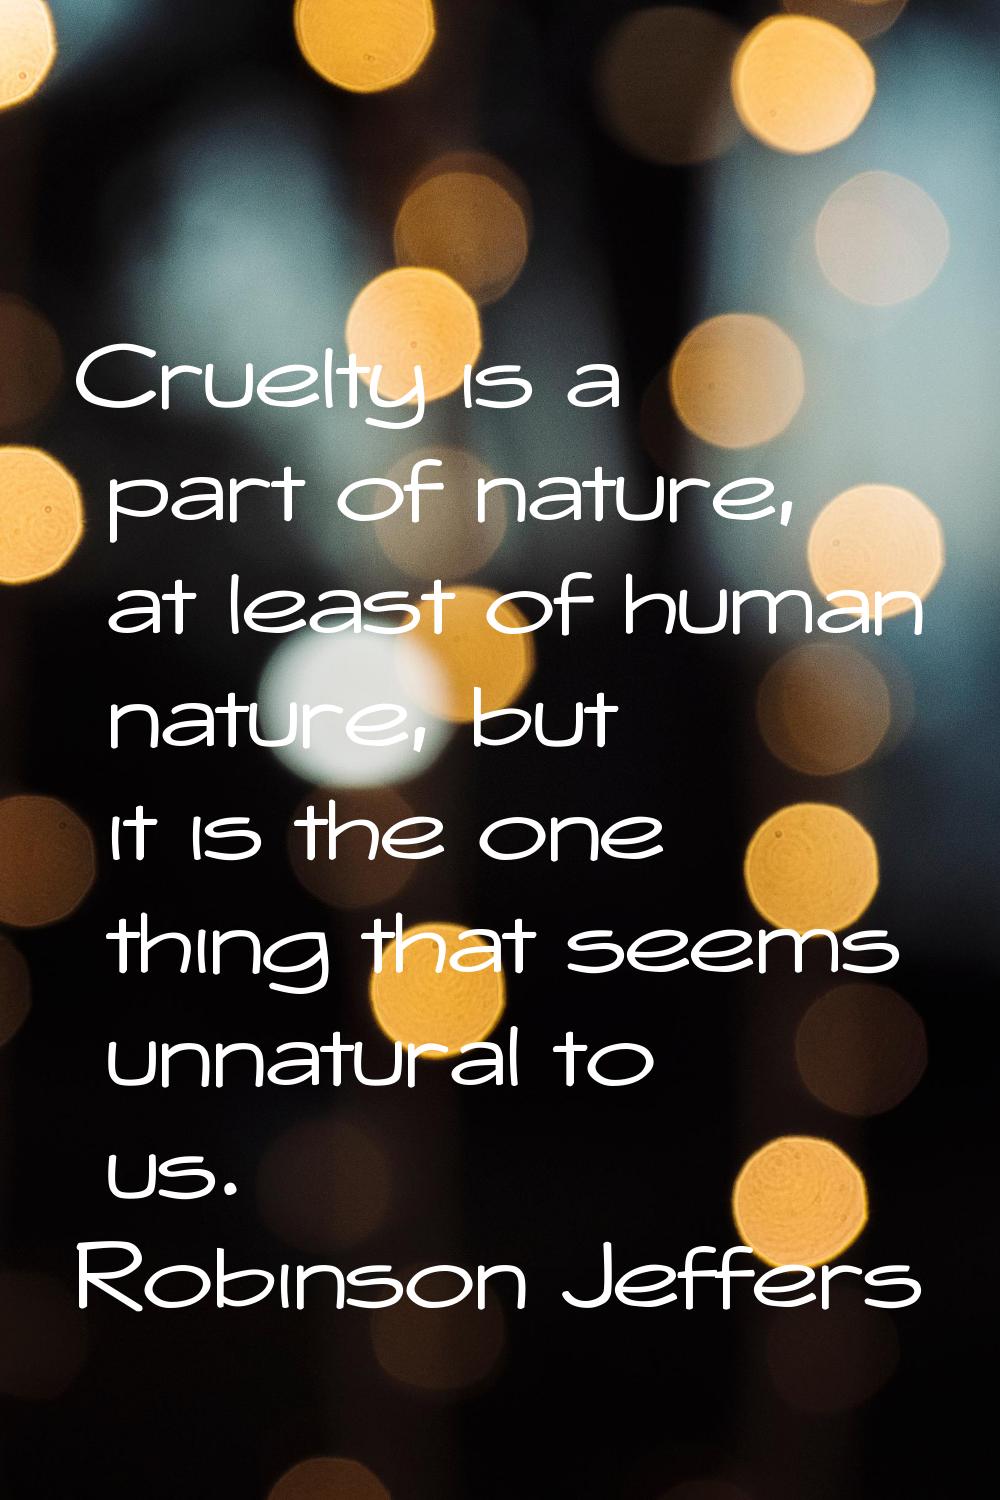 Cruelty is a part of nature, at least of human nature, but it is the one thing that seems unnatural